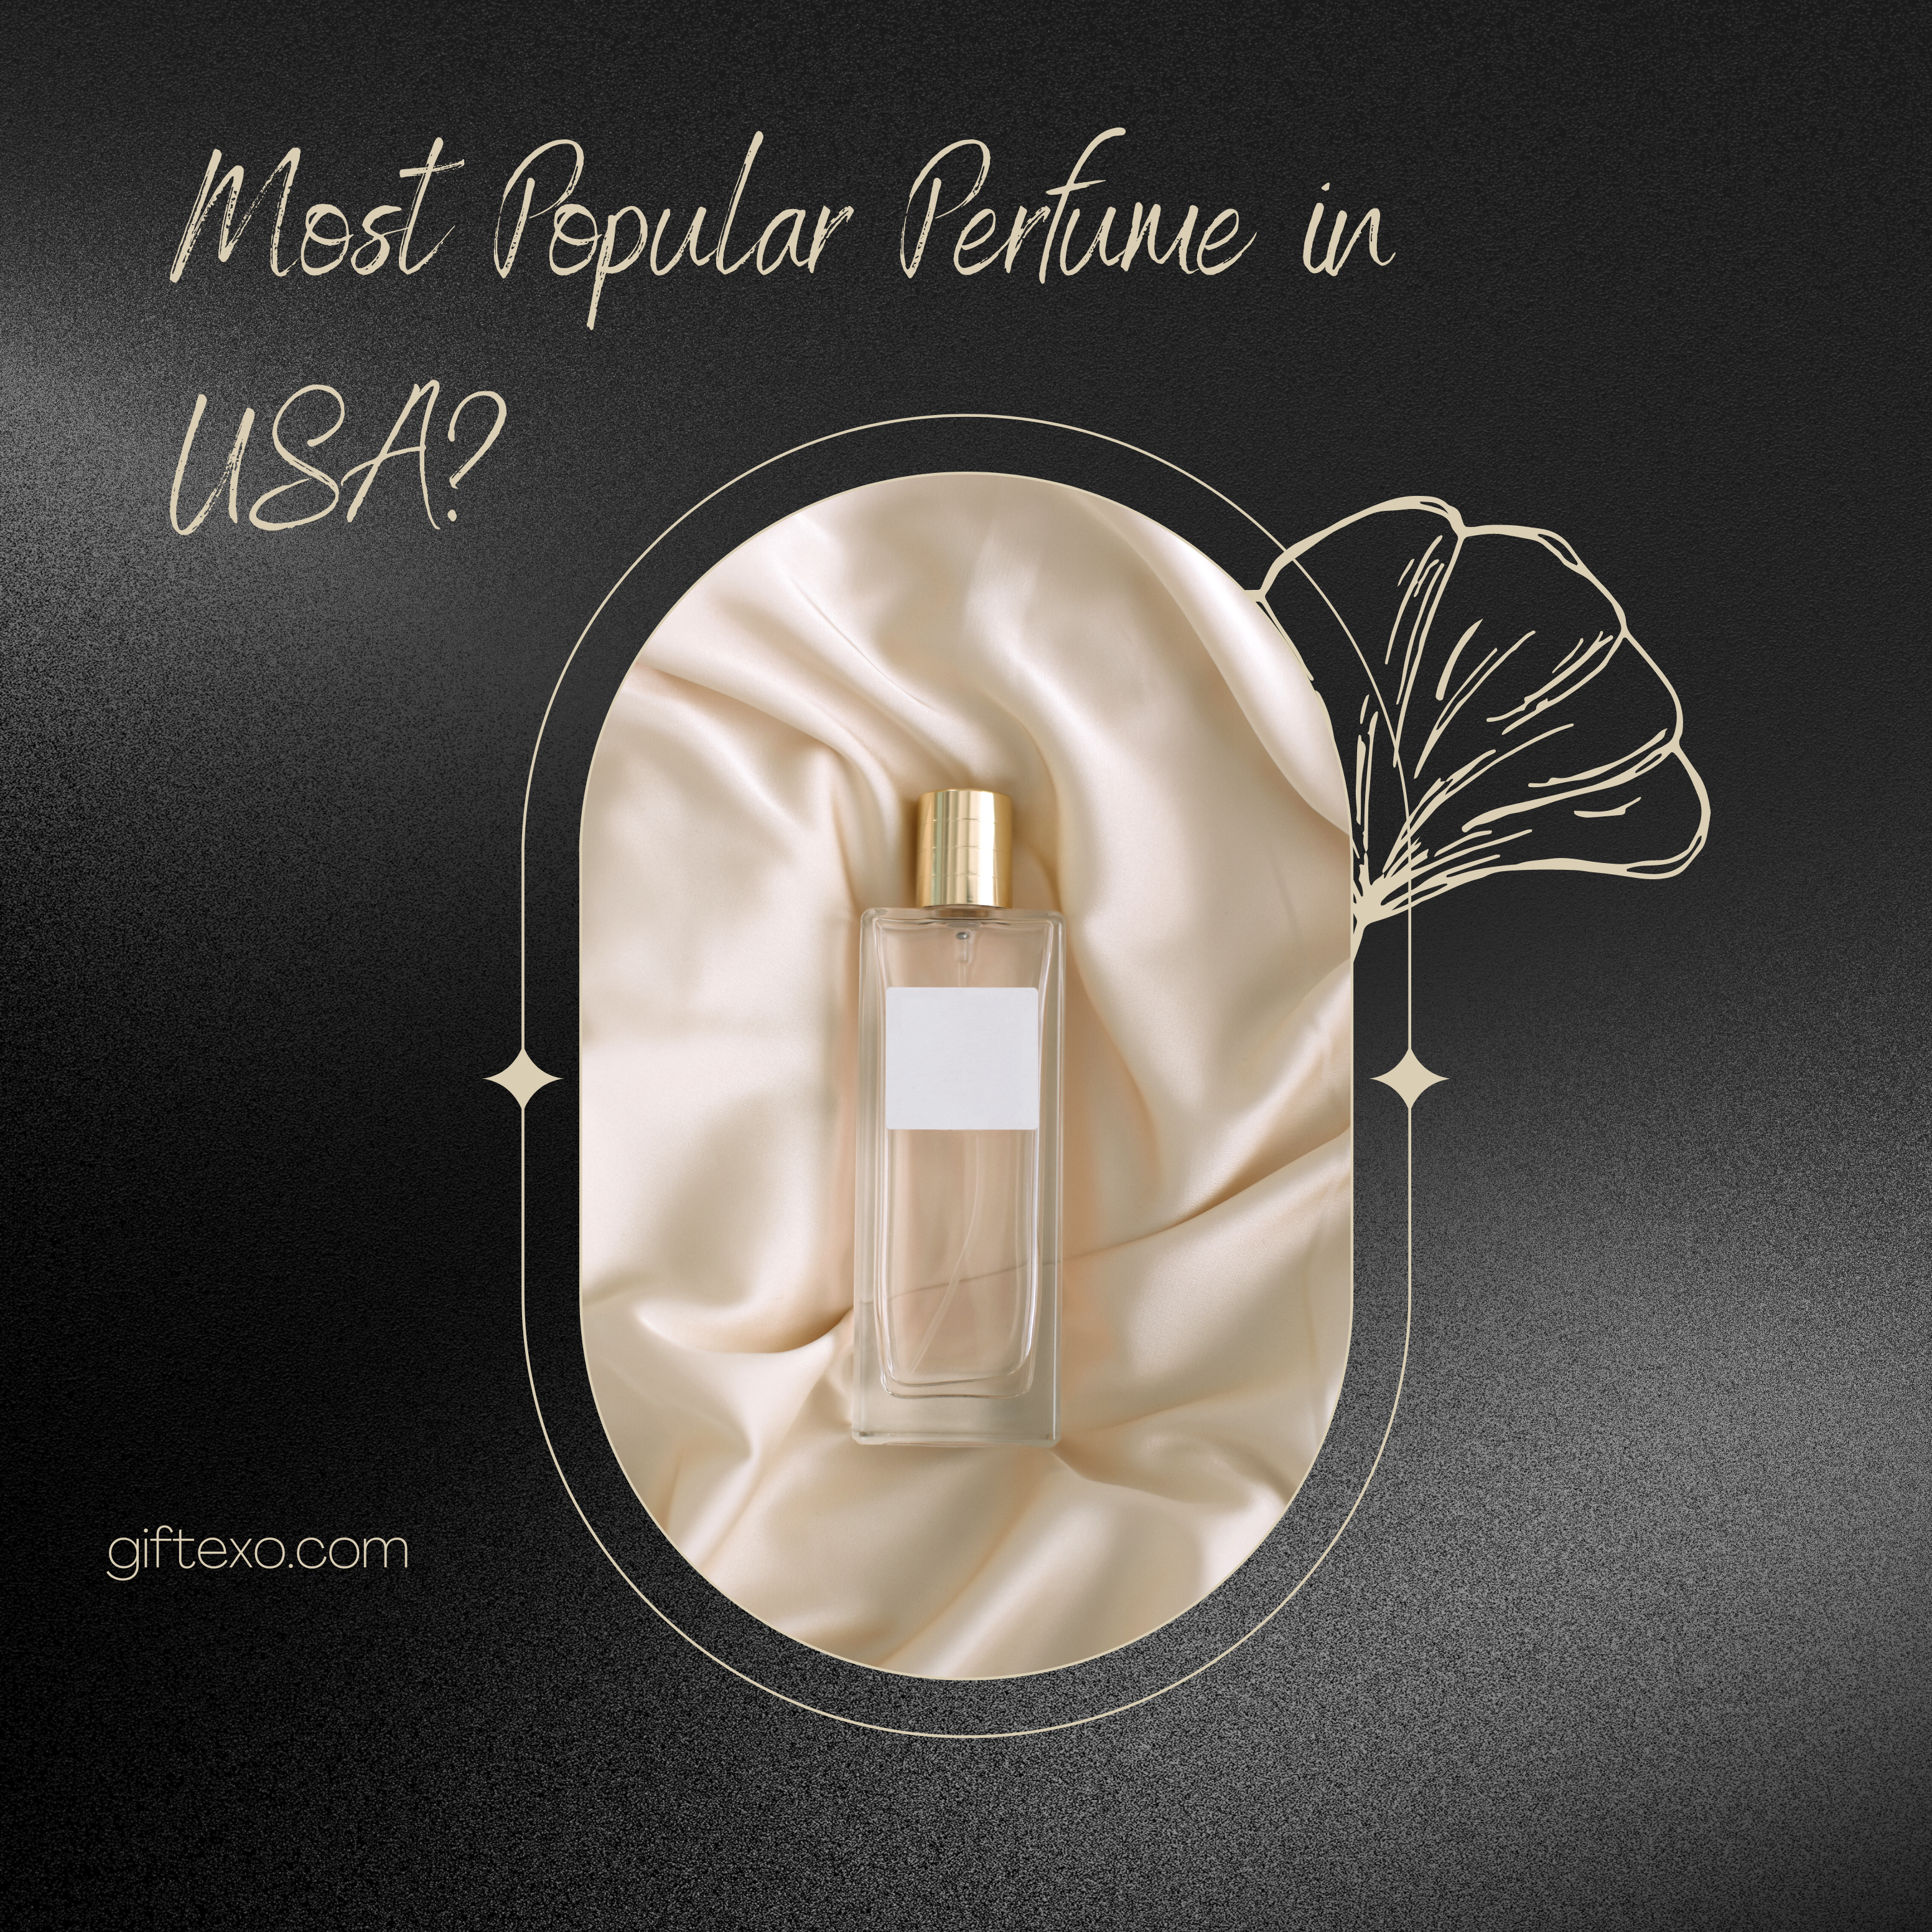 What is Most Popular Perfume in the USA?